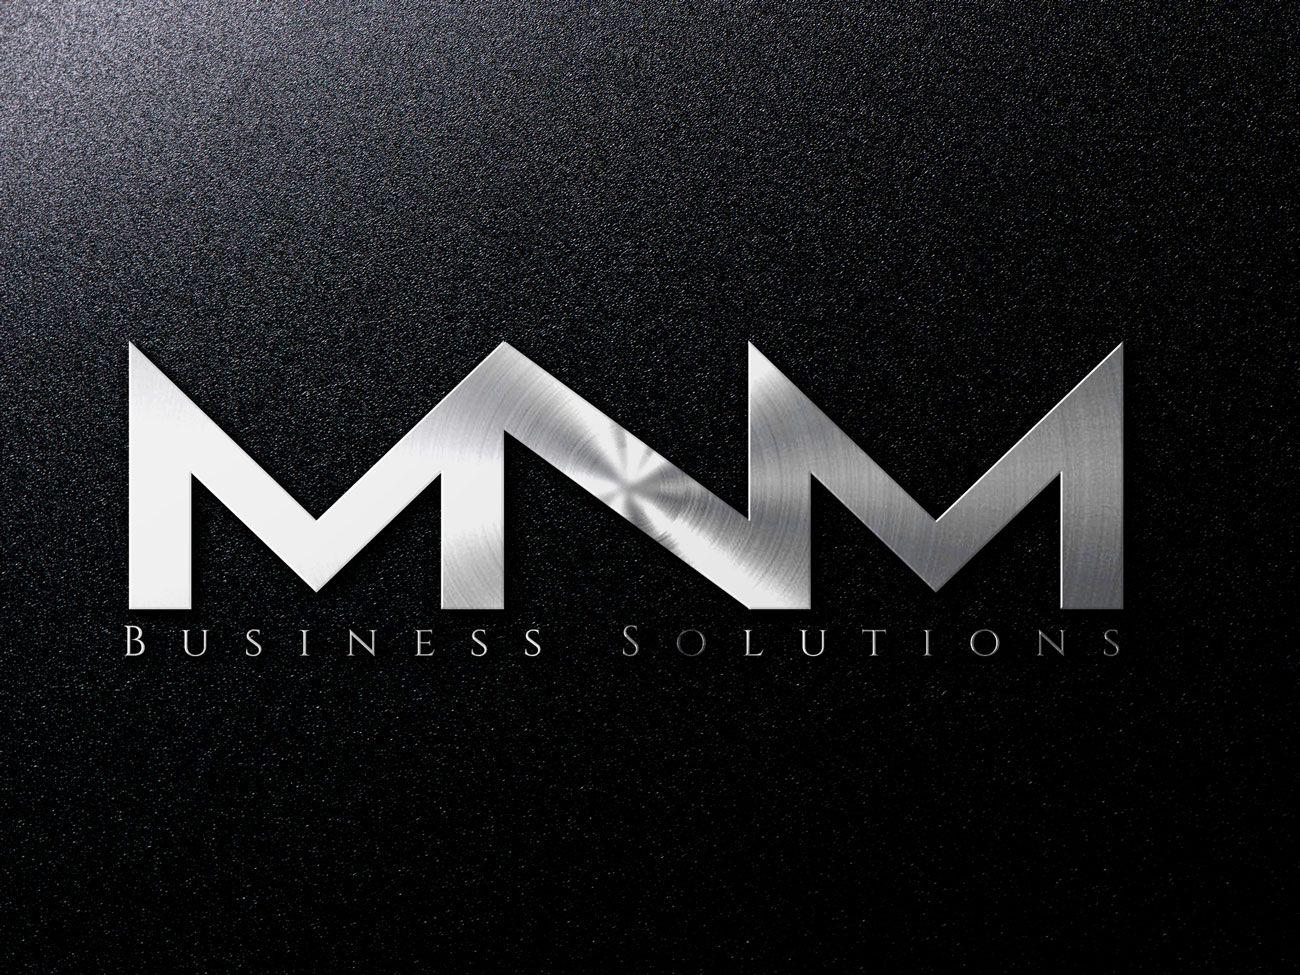 MNM Logo - Colorful, Bold, Consulting Logo Design for MnM Business Solutions